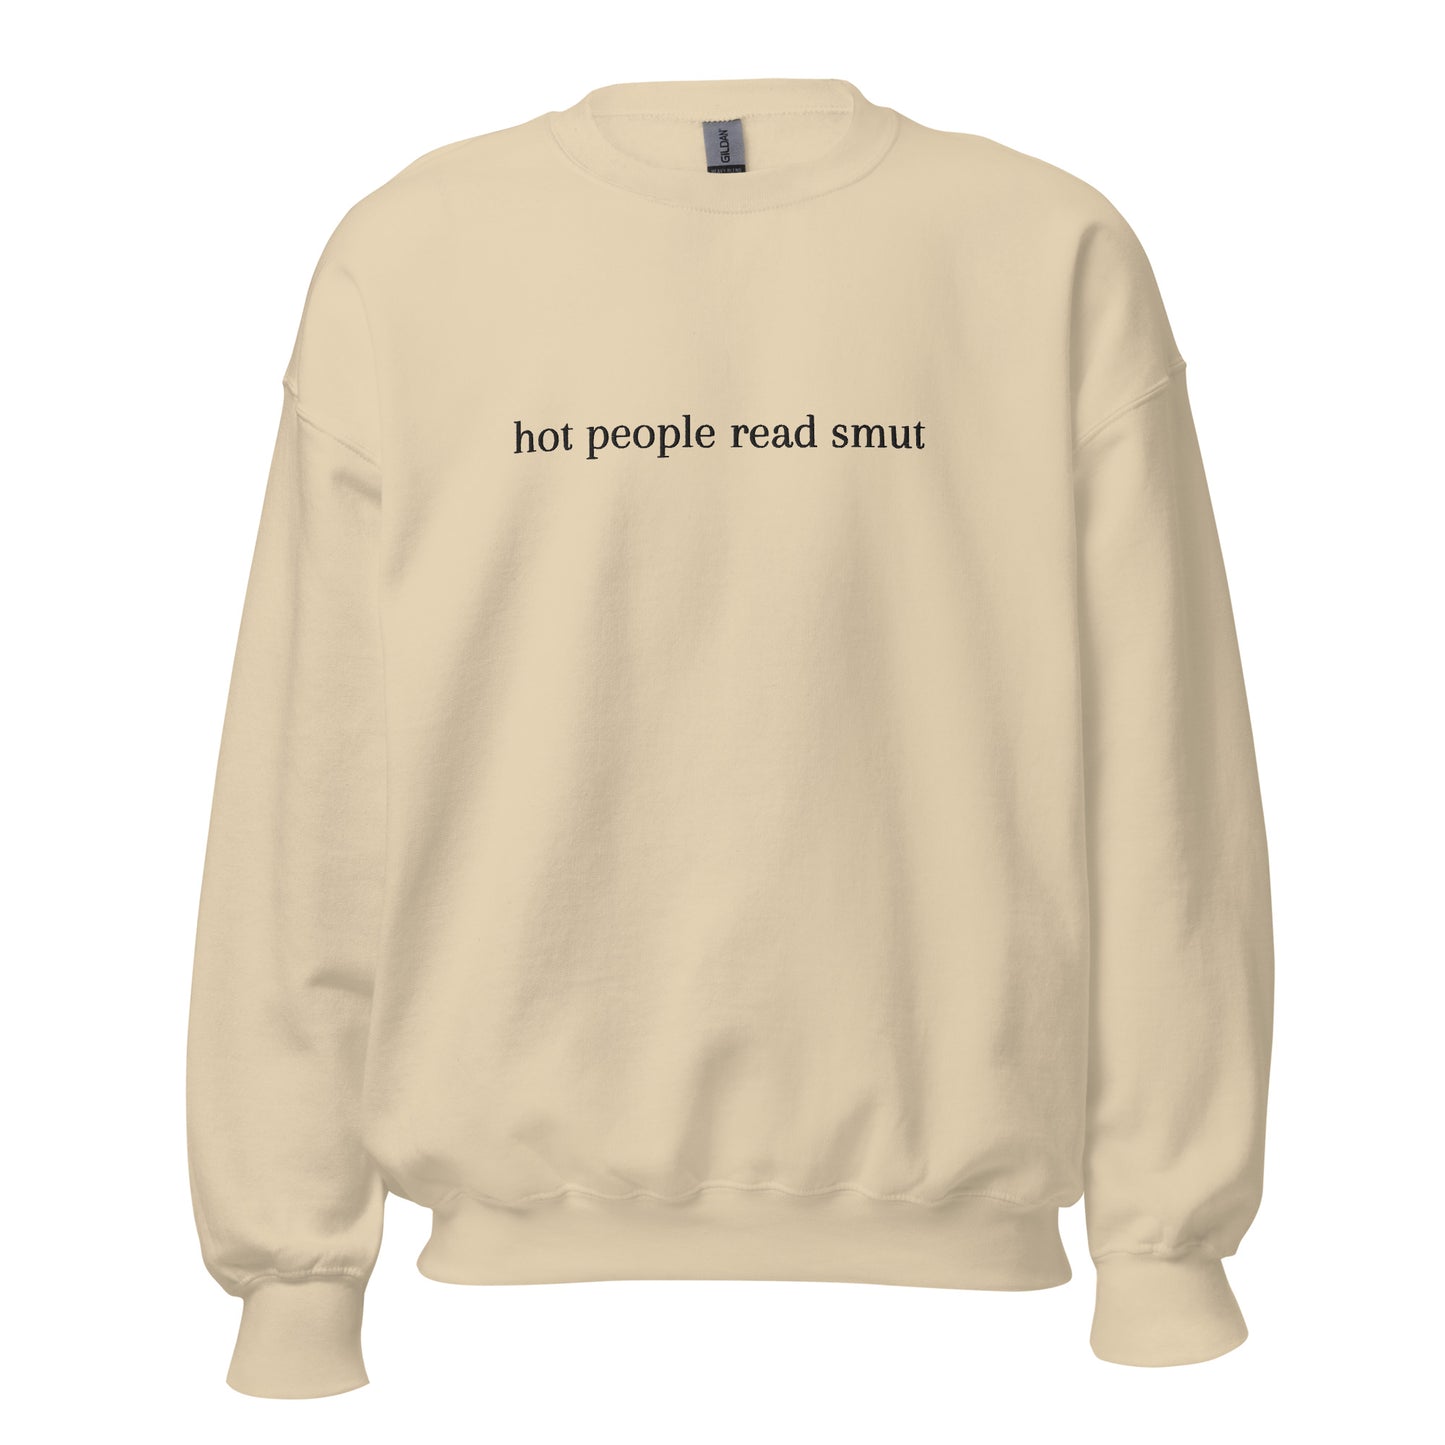 hot people read smut embroidered sweatshirt